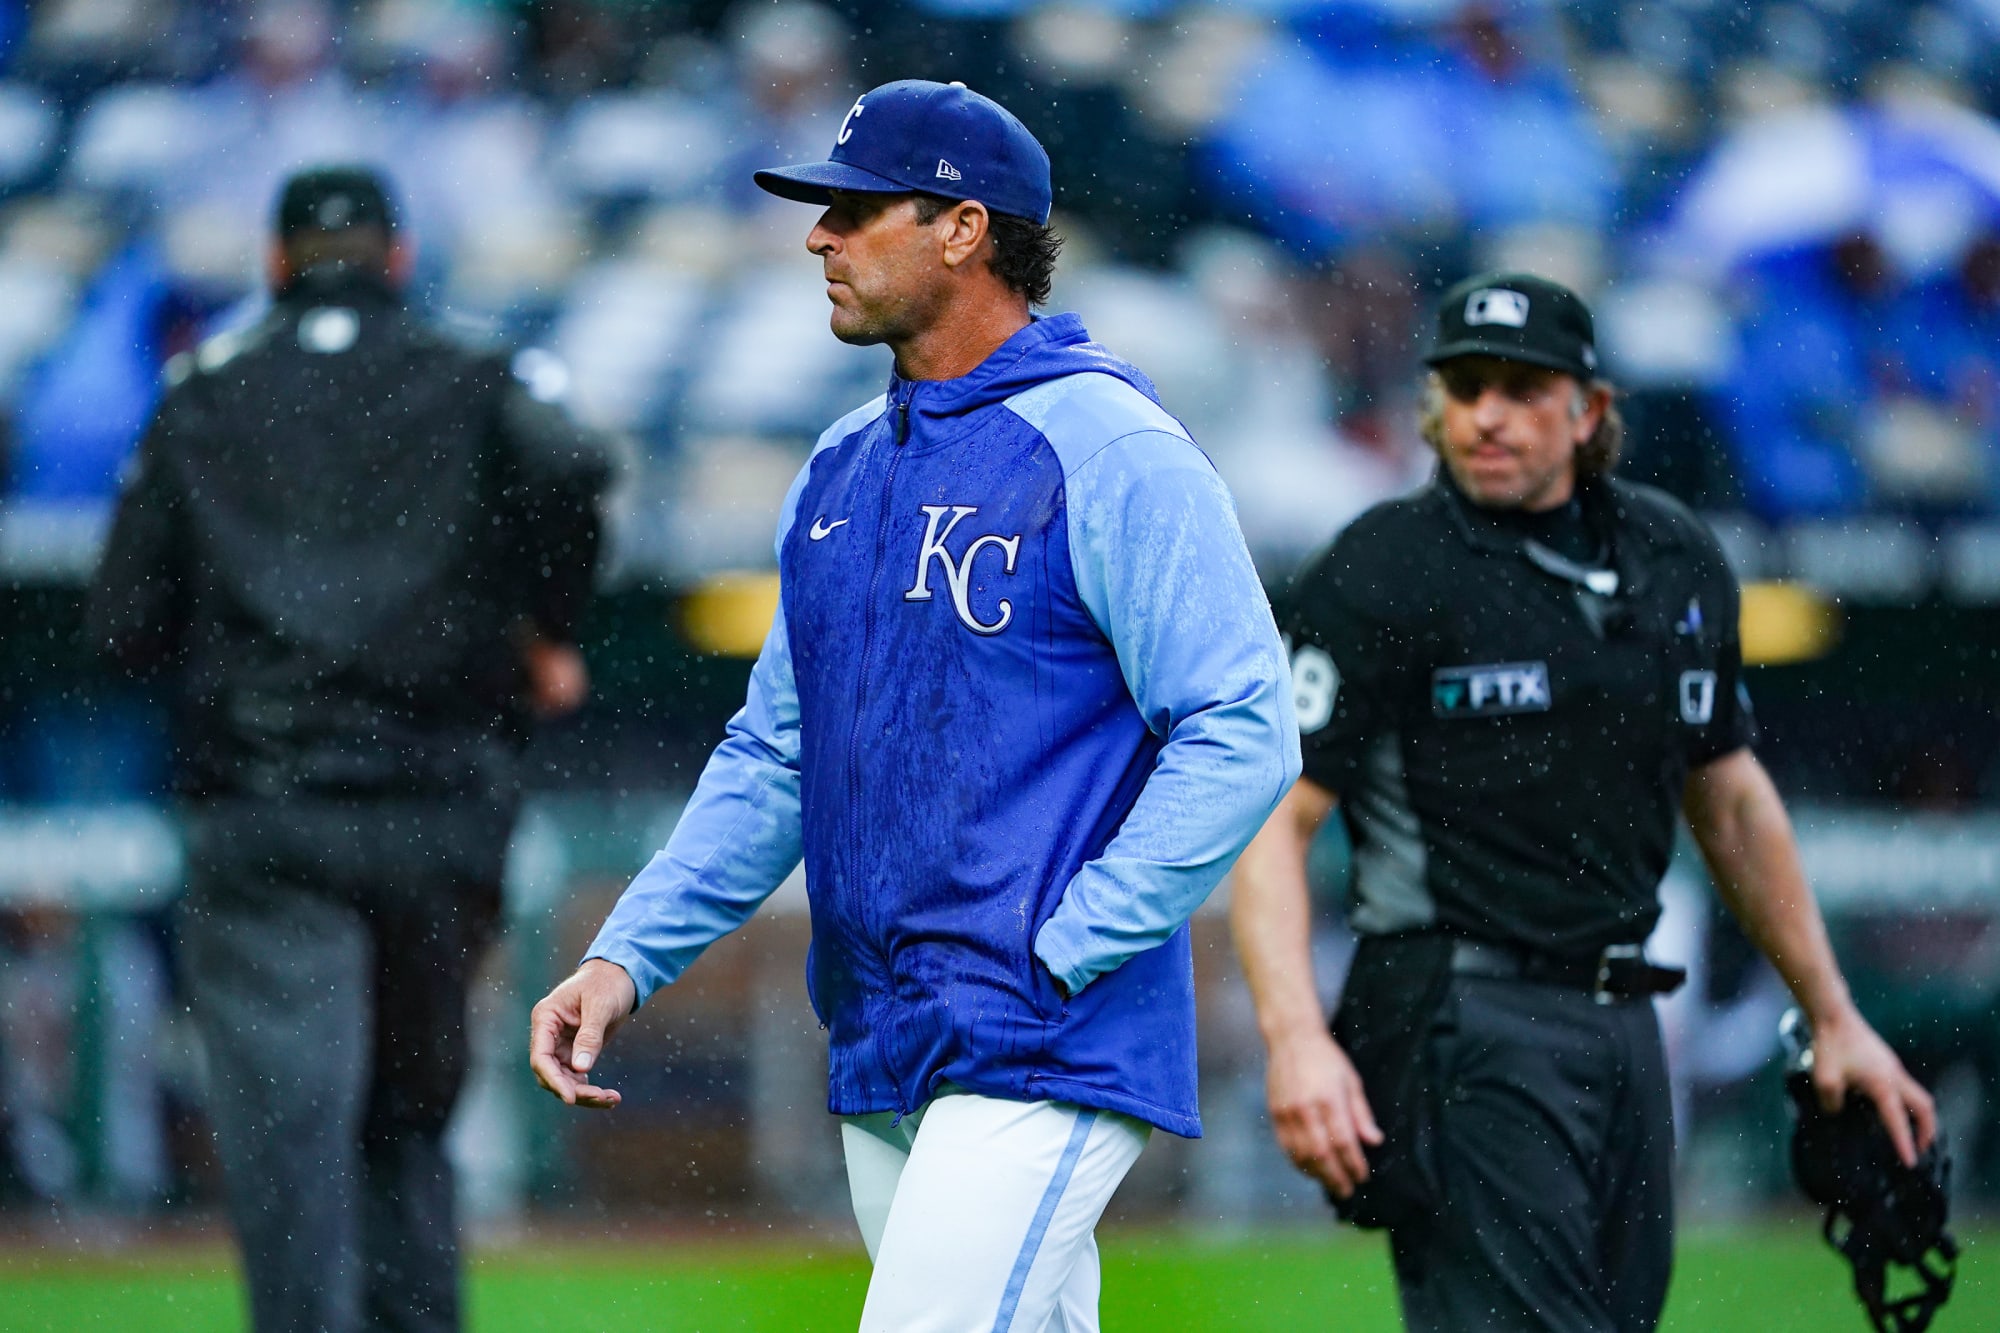 KC Royals: The Mike Matheny-Cal Eldred days are over